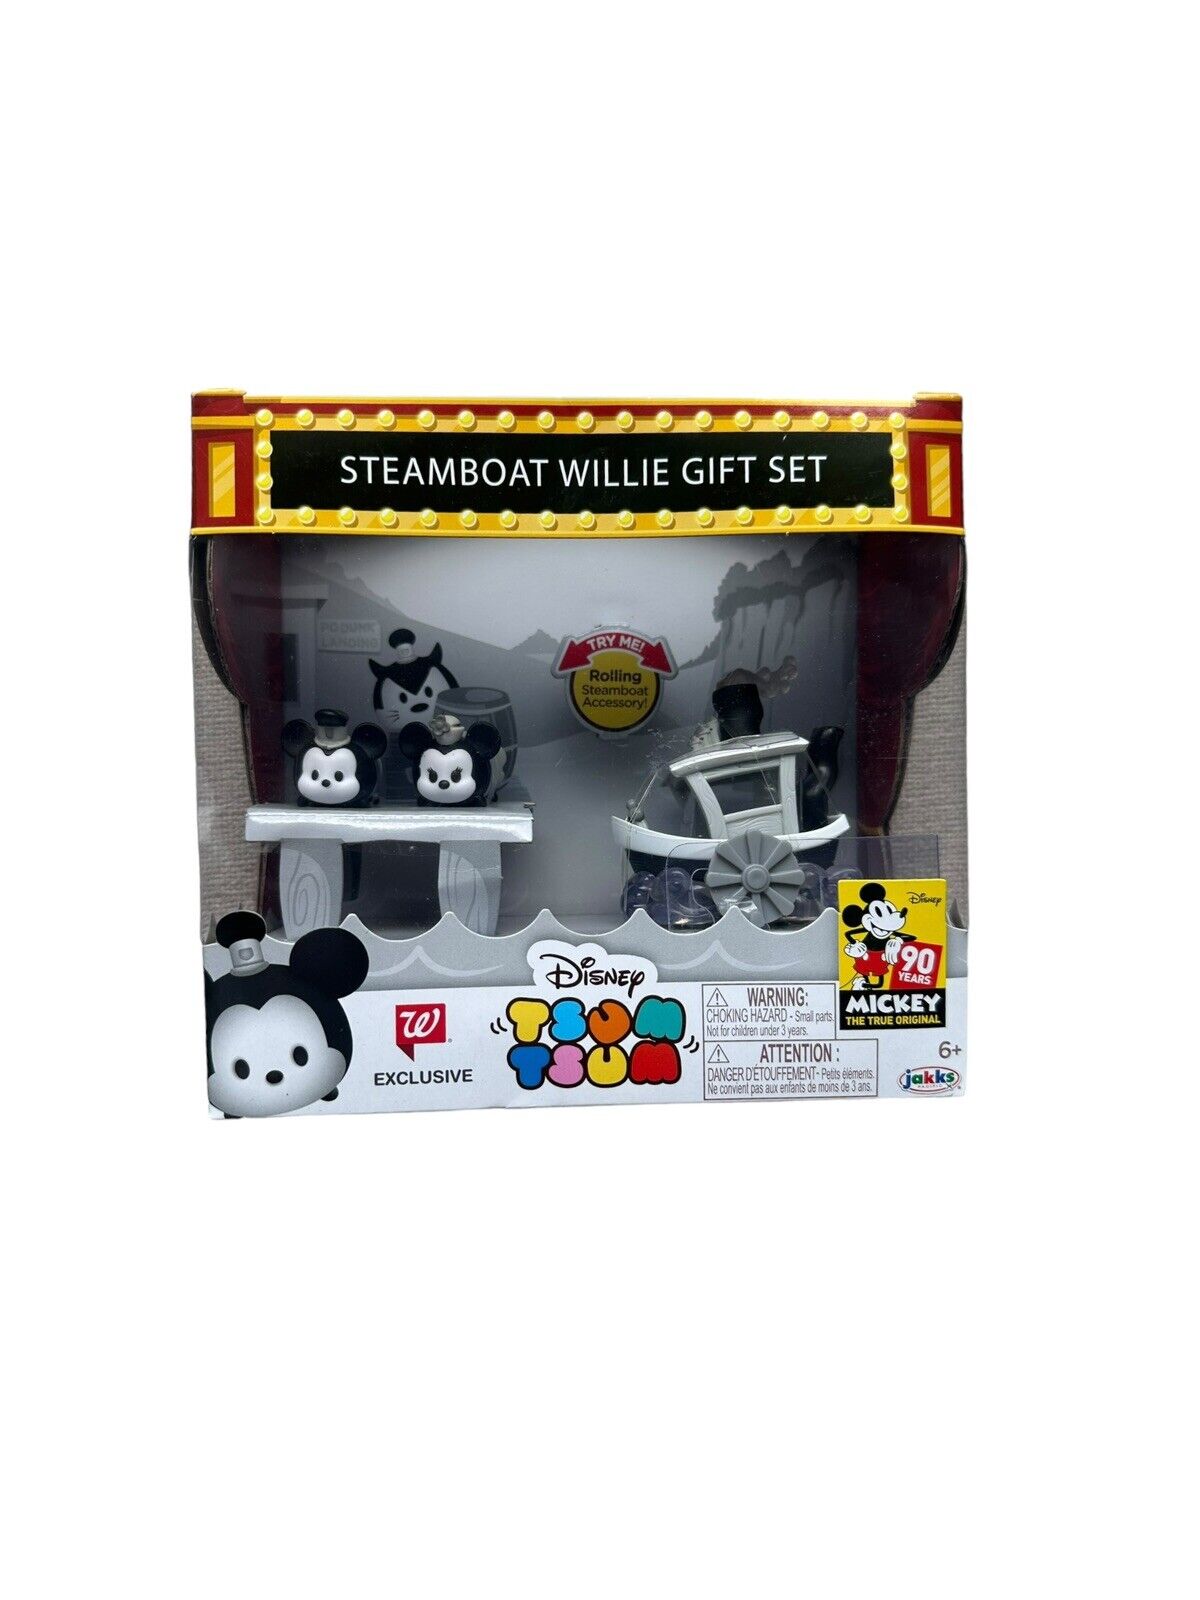 Disney Tsum Tsum Steamboat Willie Gift Set Walgreens Exclusive 90th Mickey Mouse